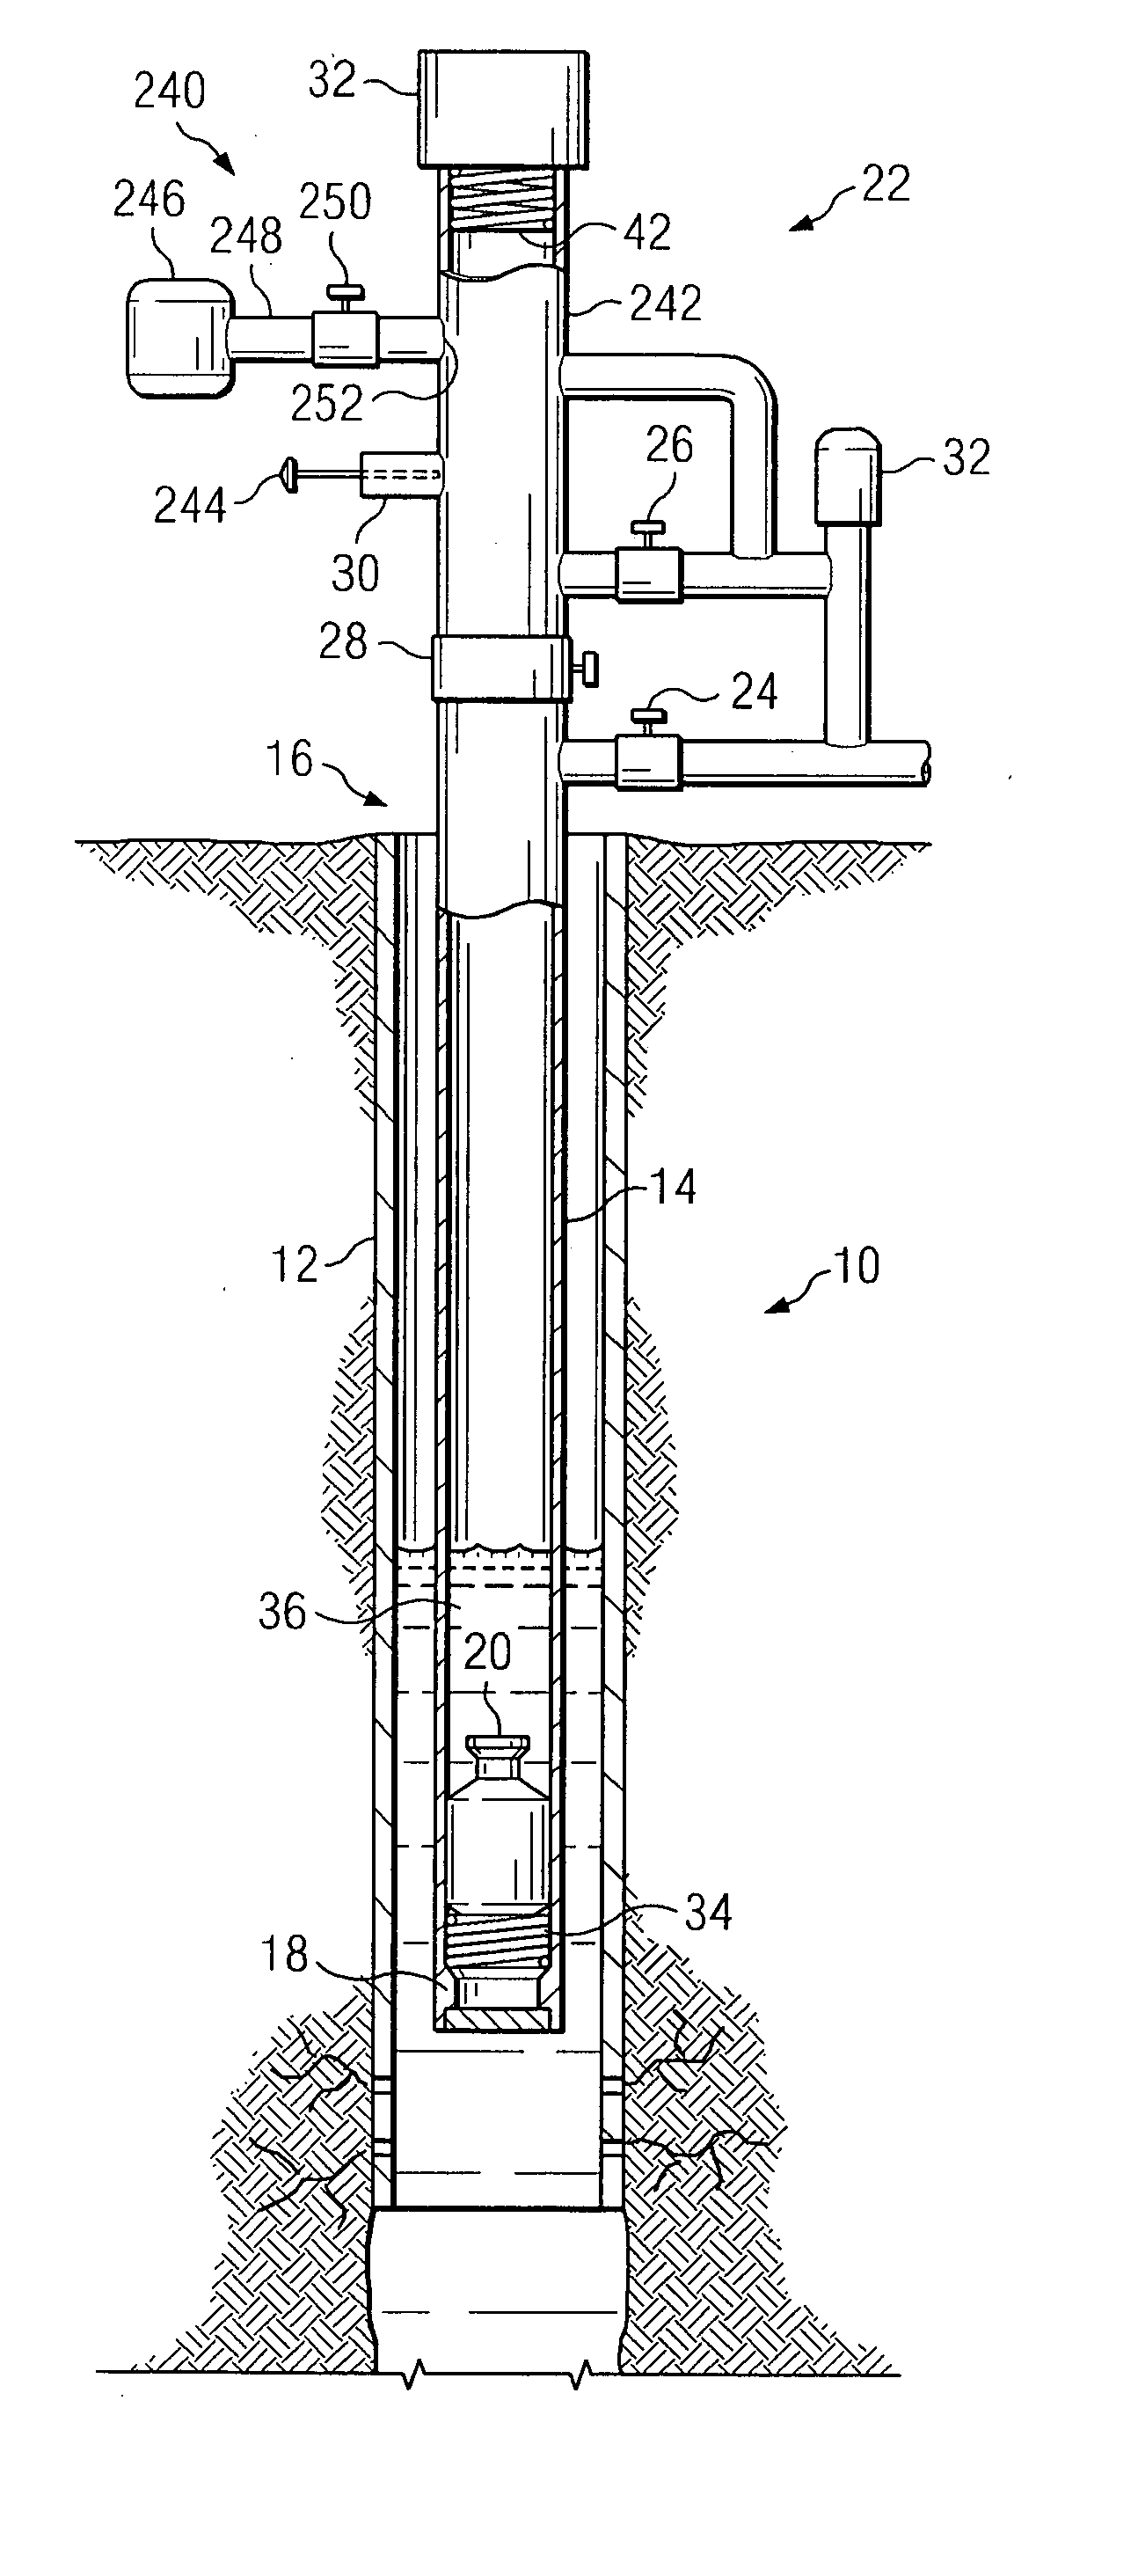 Well chemical treatment utilizing plunger lift delivery system